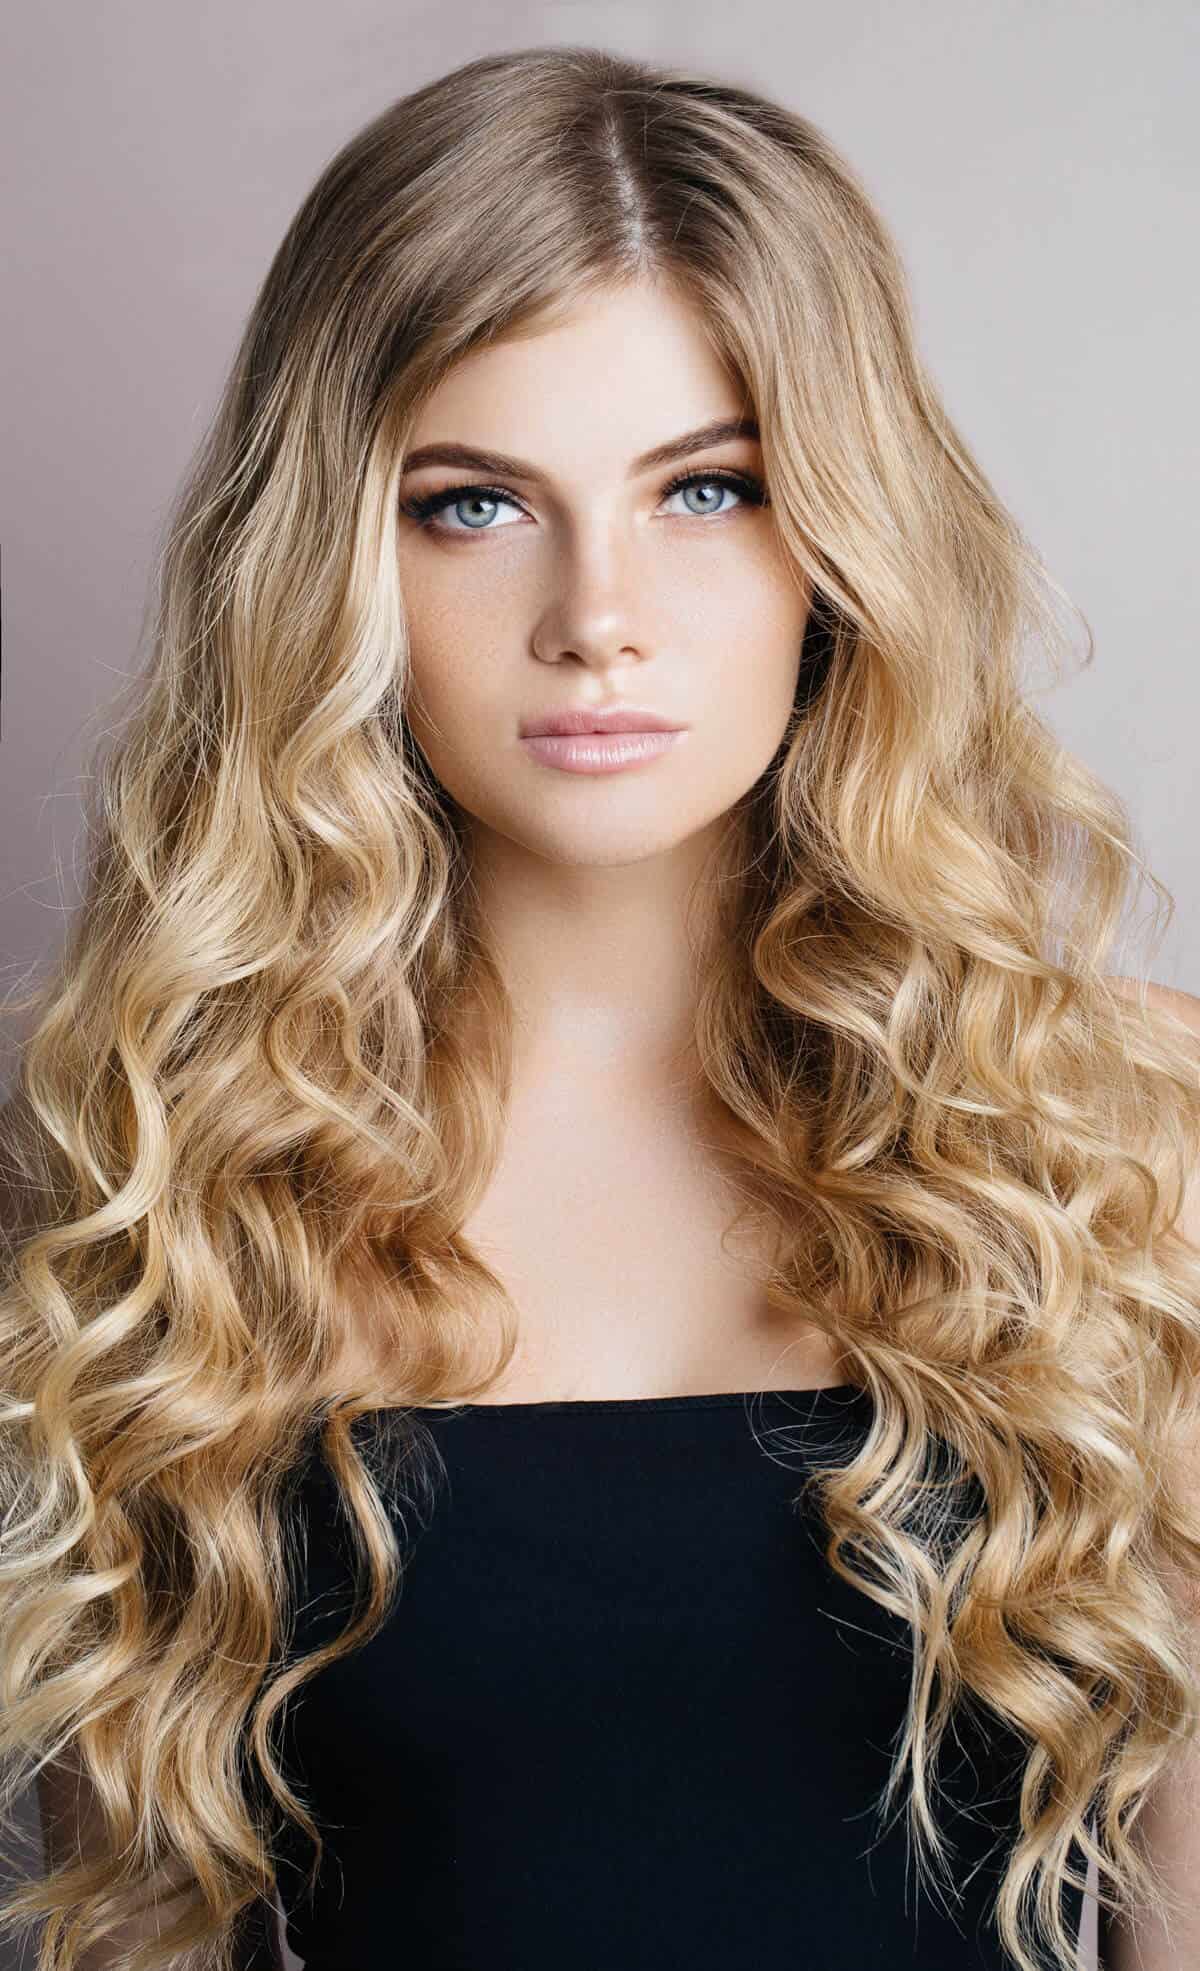 Woman with long blond curly hair